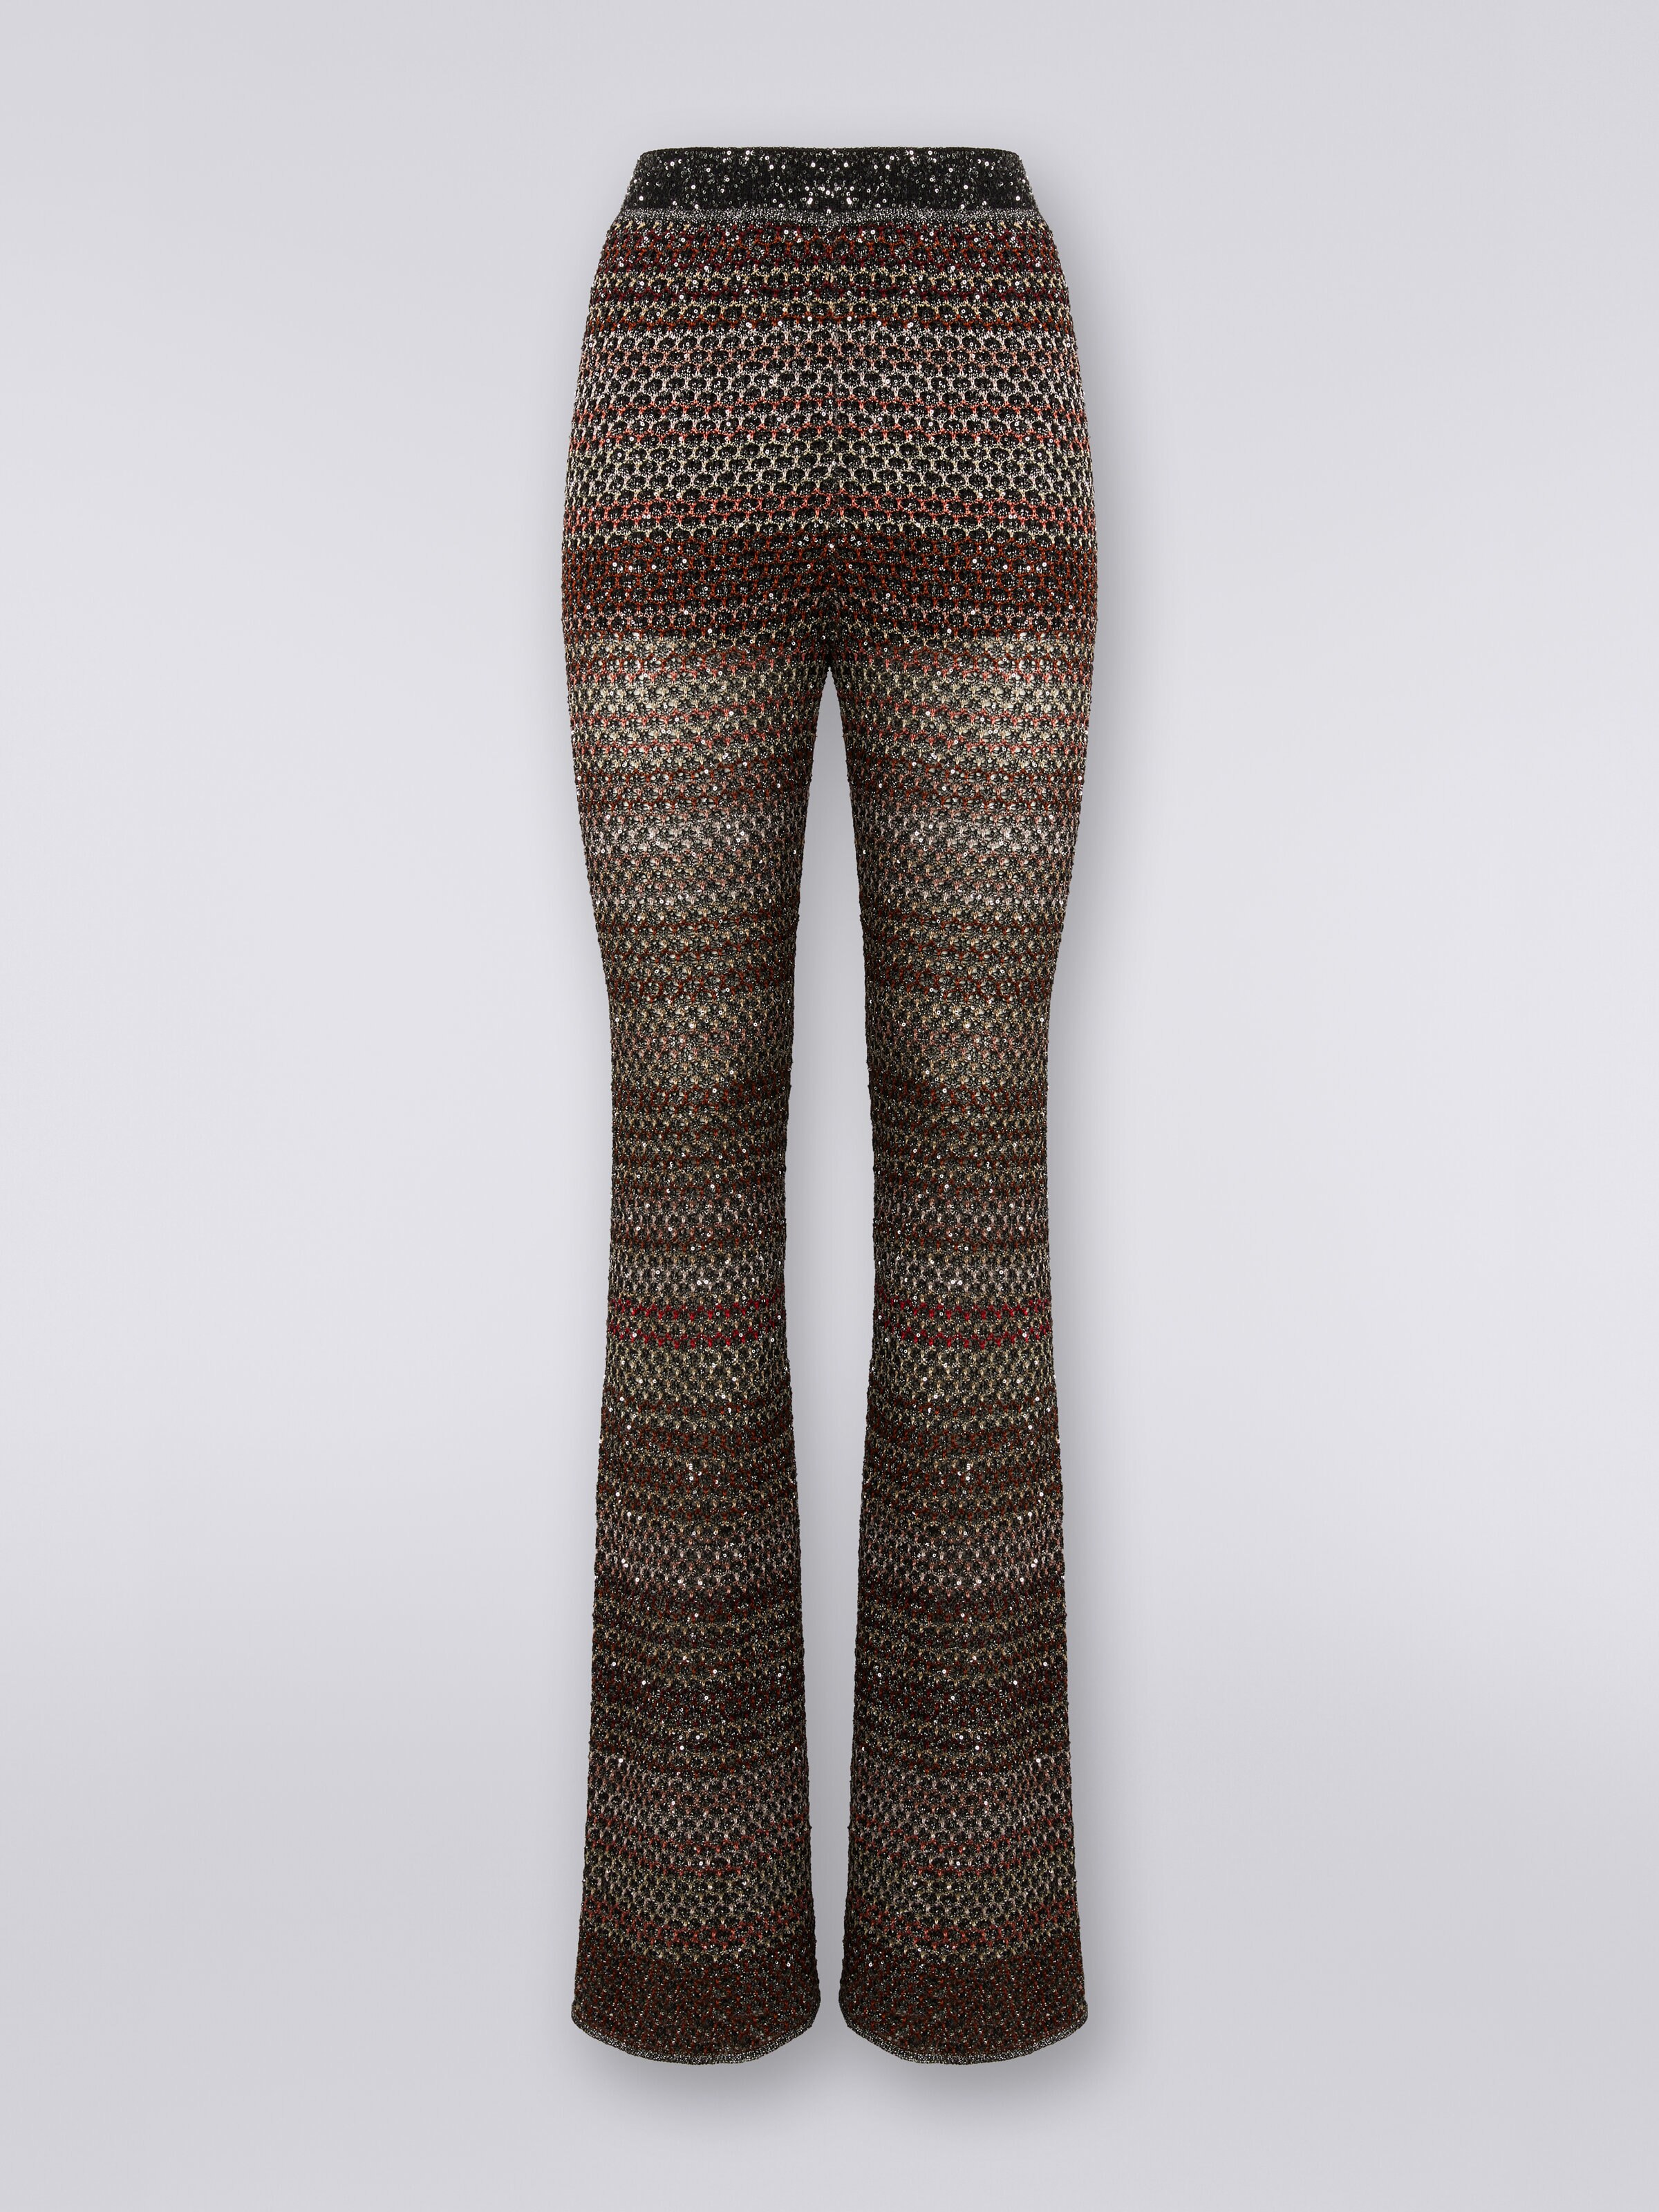 Trousers in mesh knit with sequin appliqué  , Multicoloured  - 0